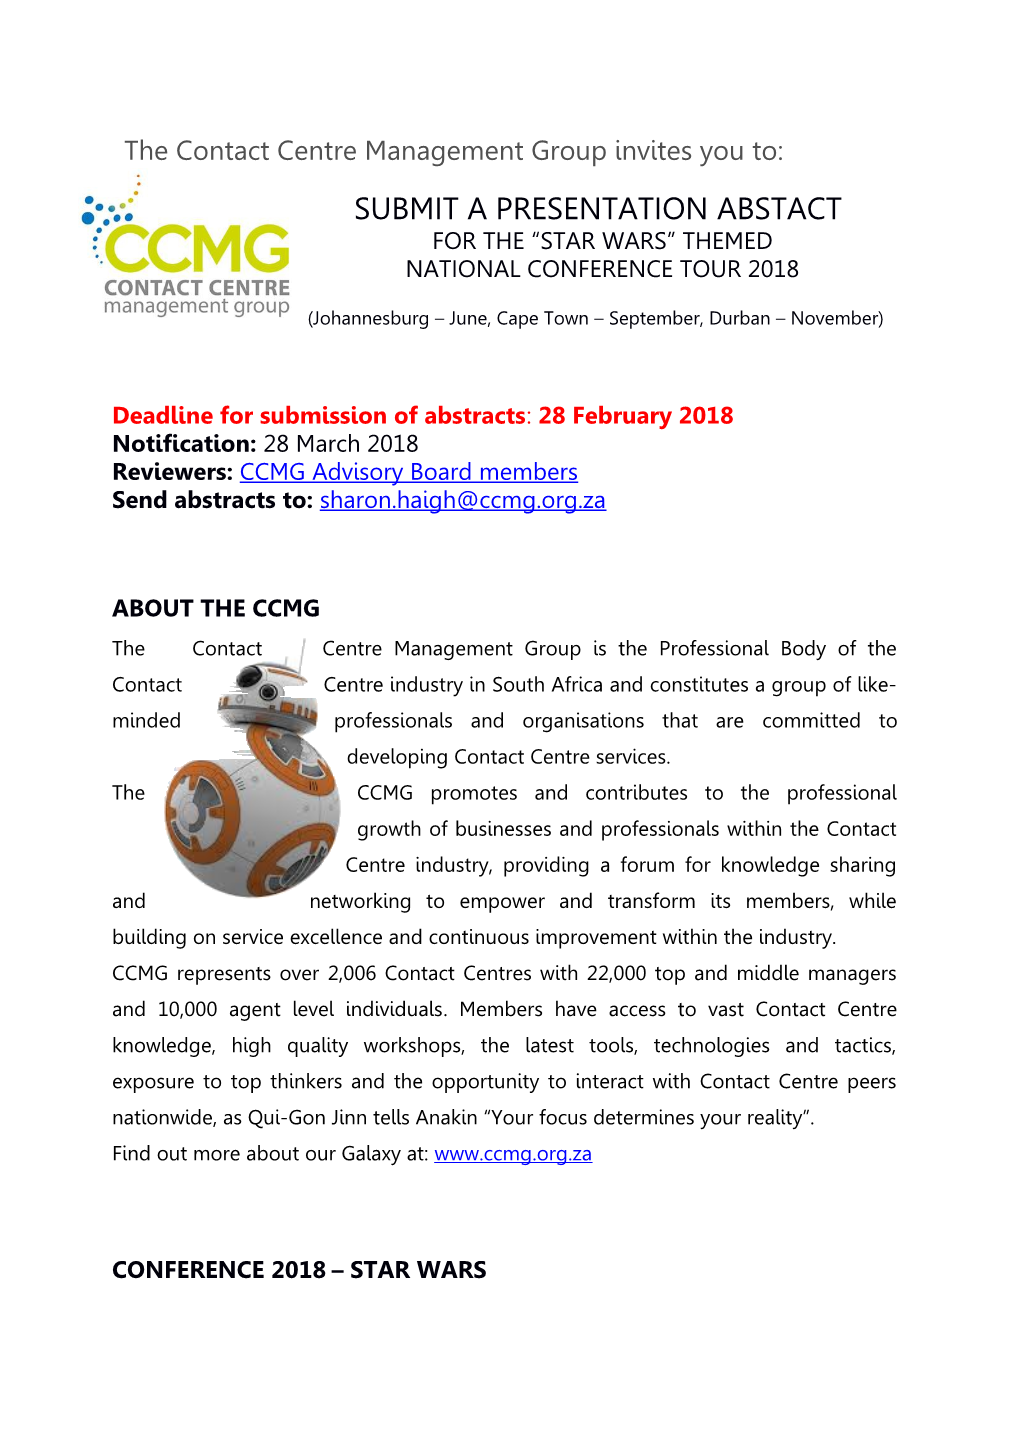 The Contact Centre Management Group Invites You To